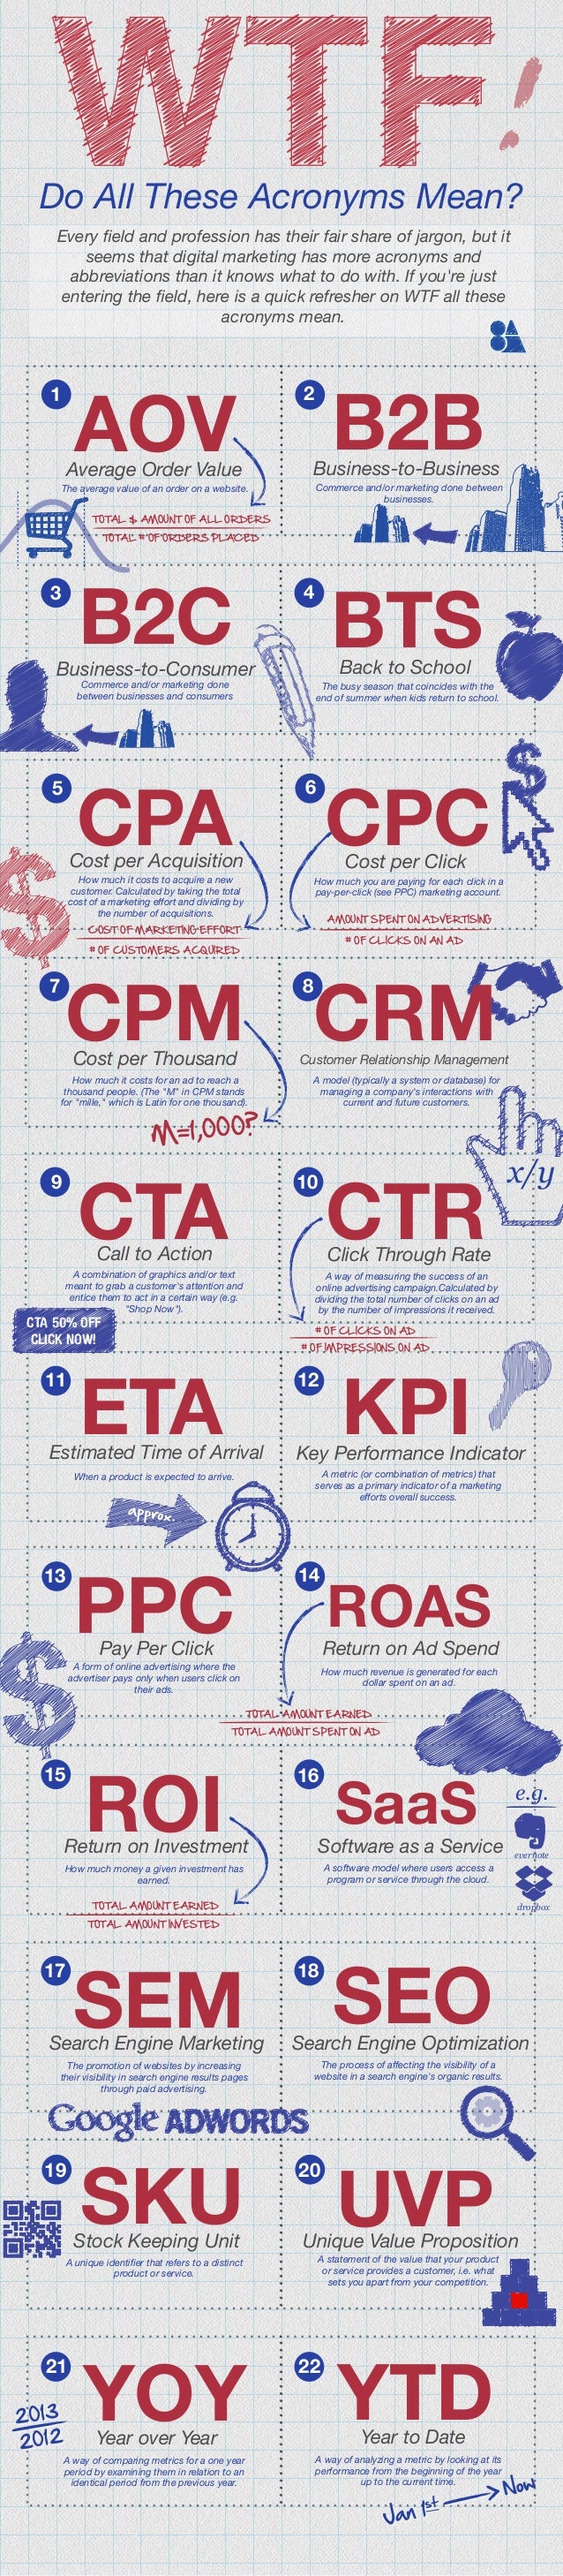 WTF Do All These Acronyms Mean? [INFOGRAPHIC]